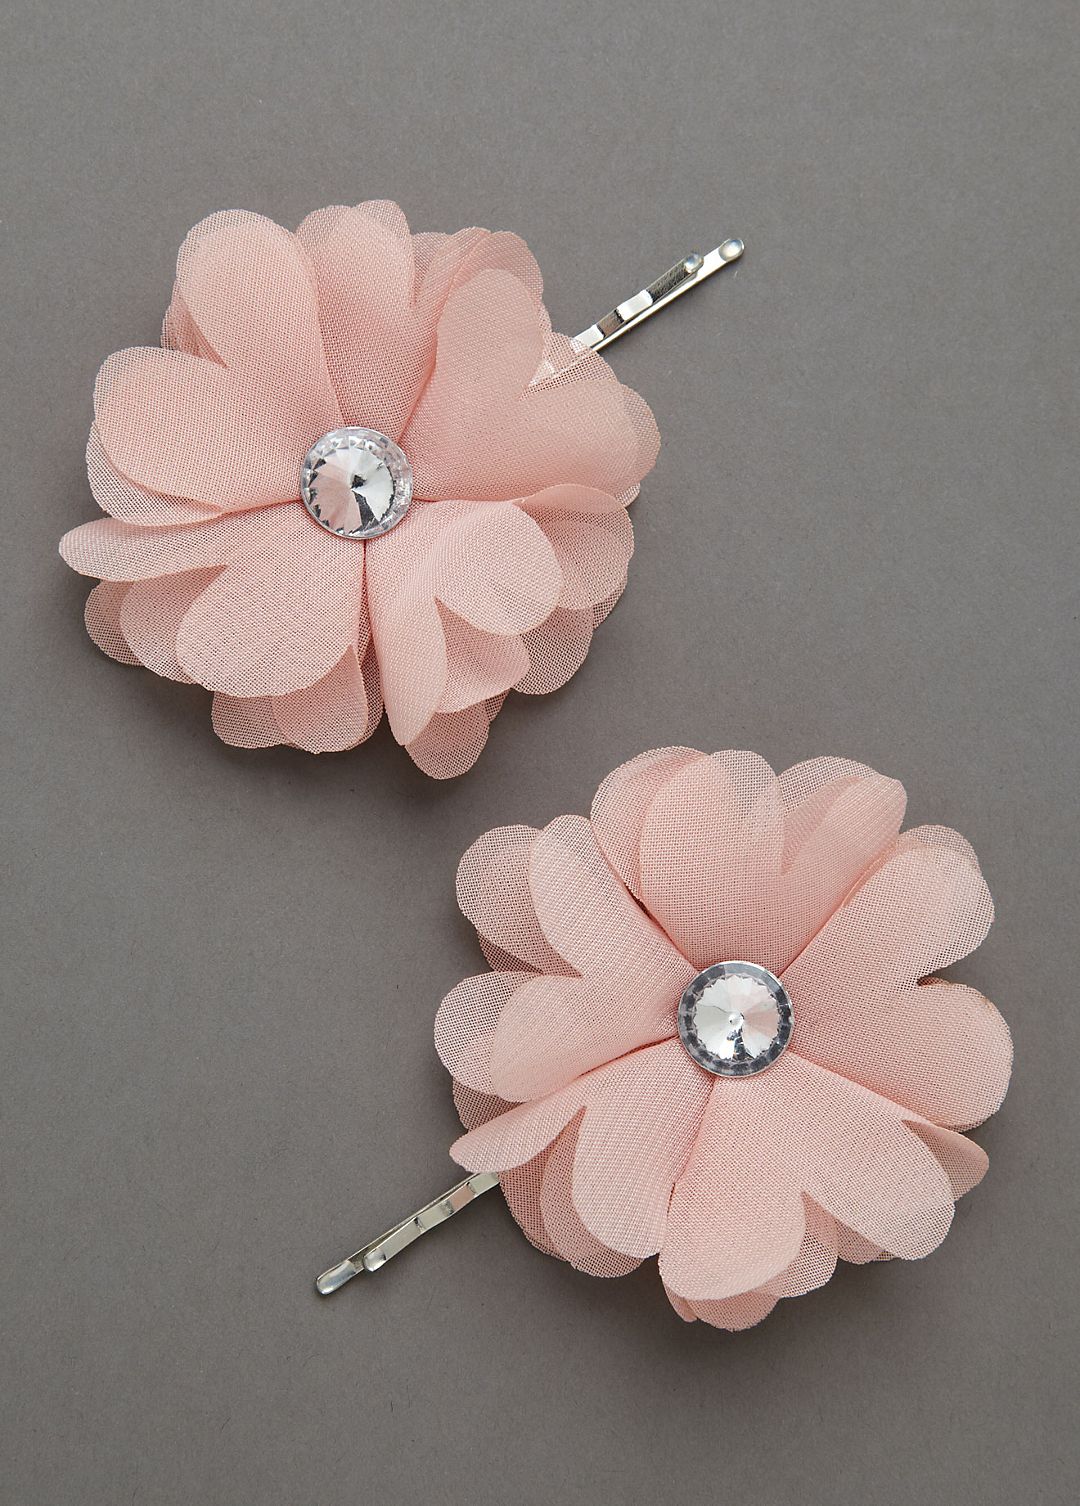 Fabric Floral Design Bobby Pins Image 1